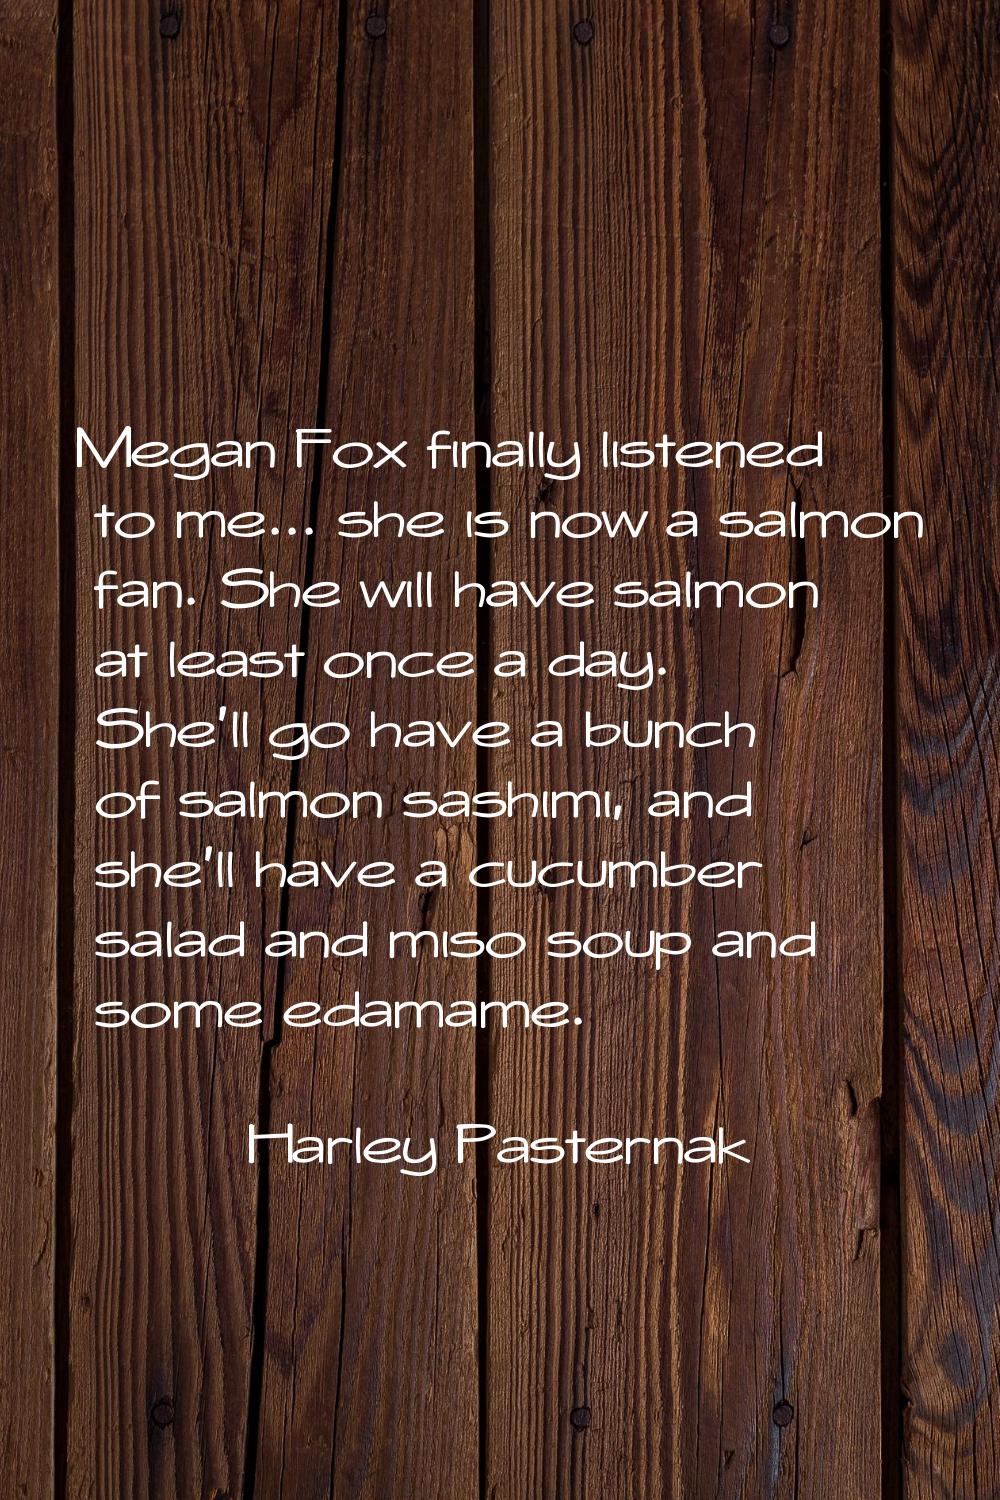 Megan Fox finally listened to me... she is now a salmon fan. She will have salmon at least once a d